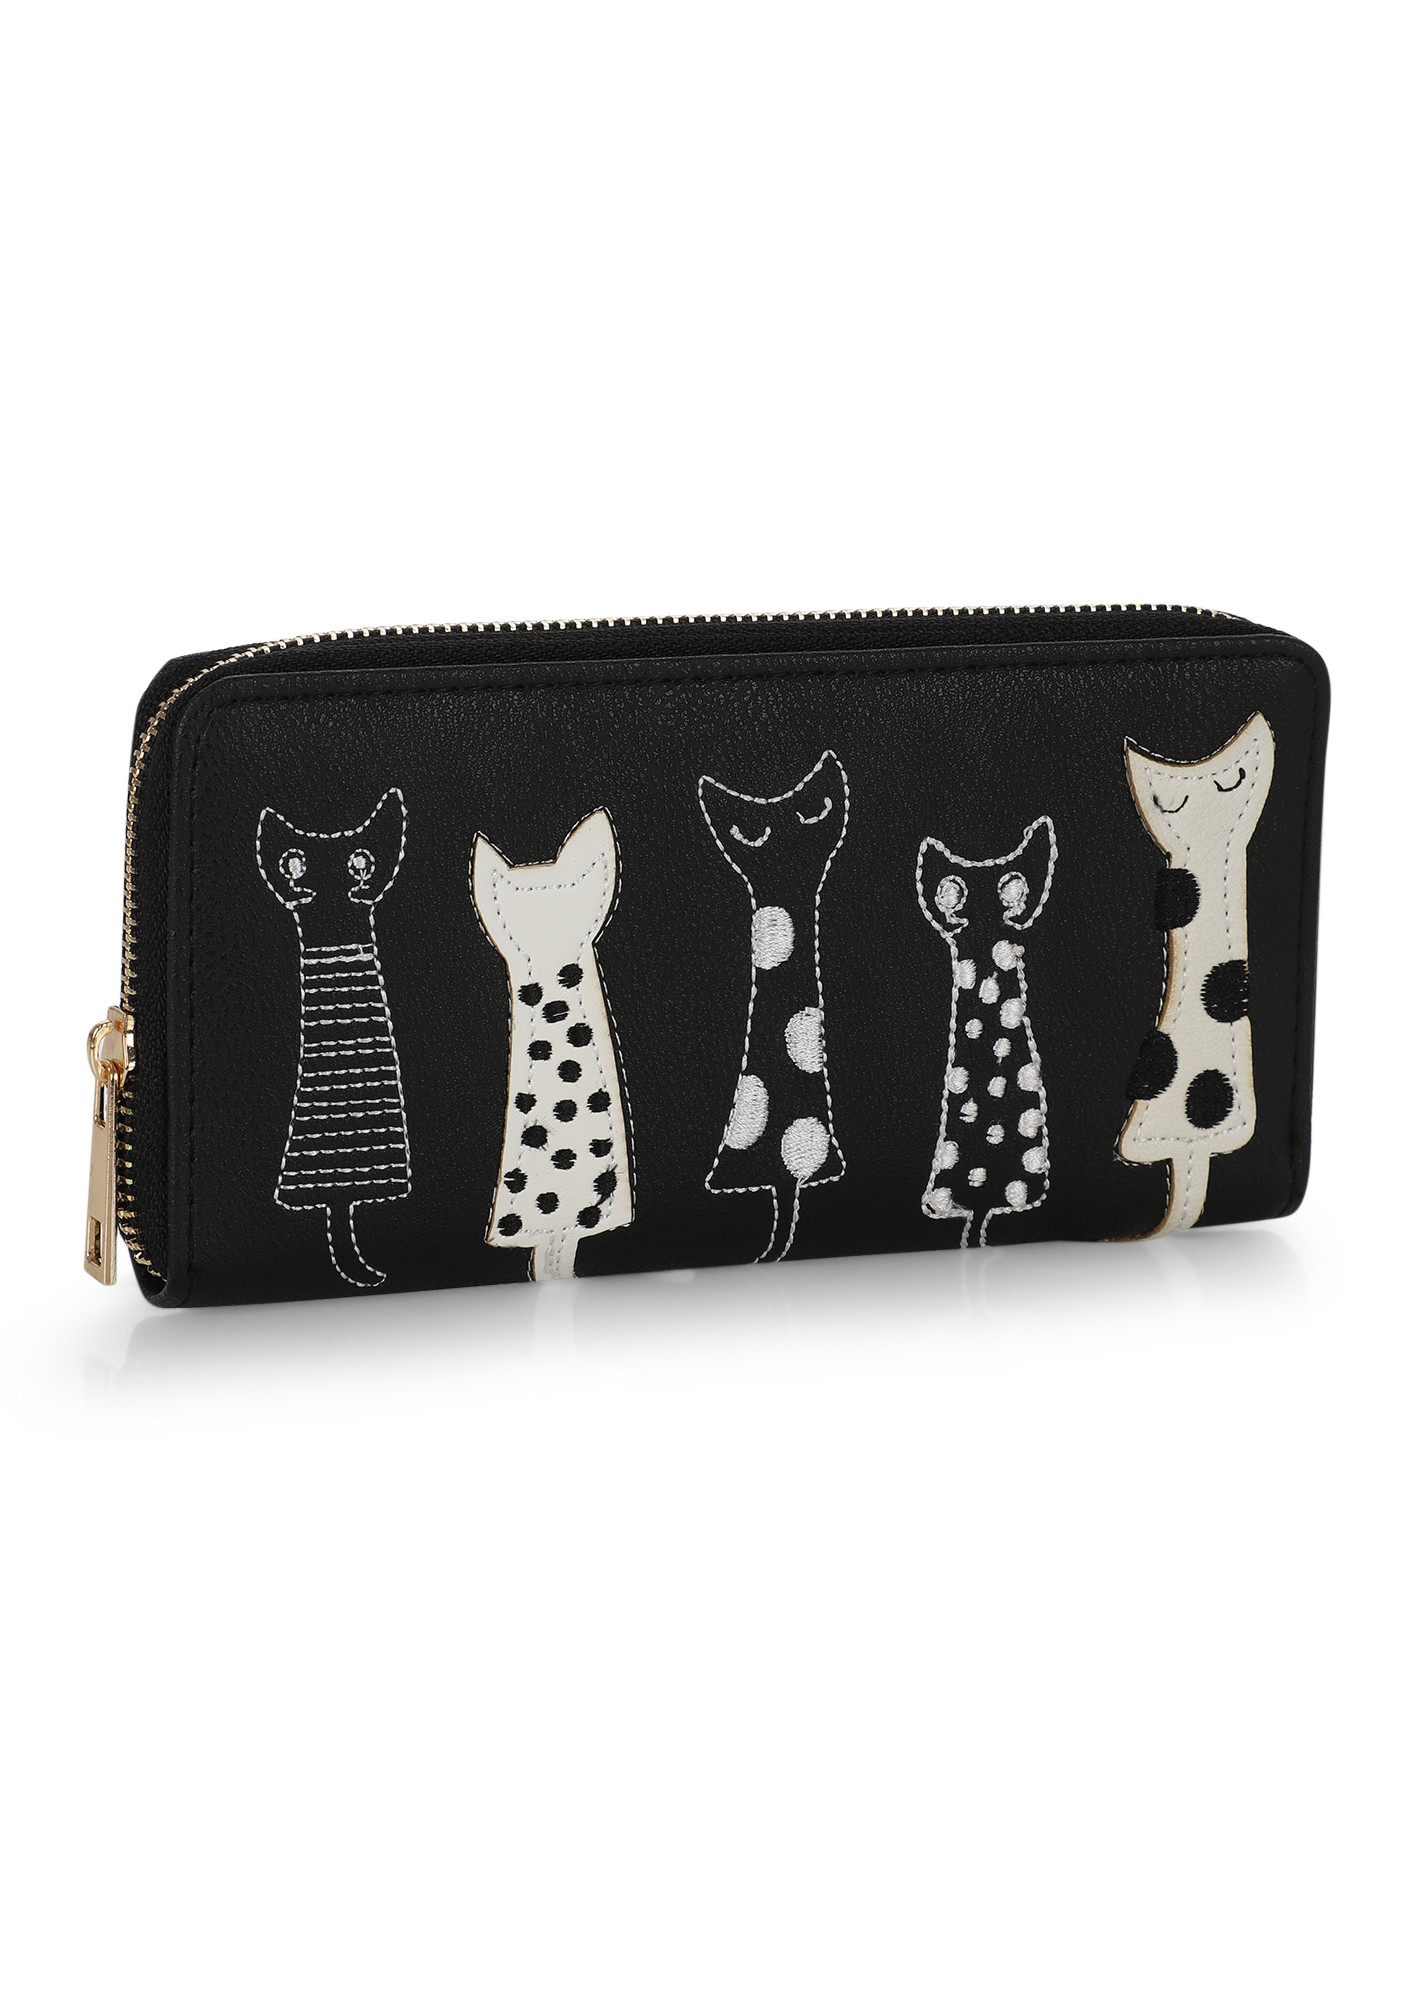 SUCH A CATY BLACK WALLET